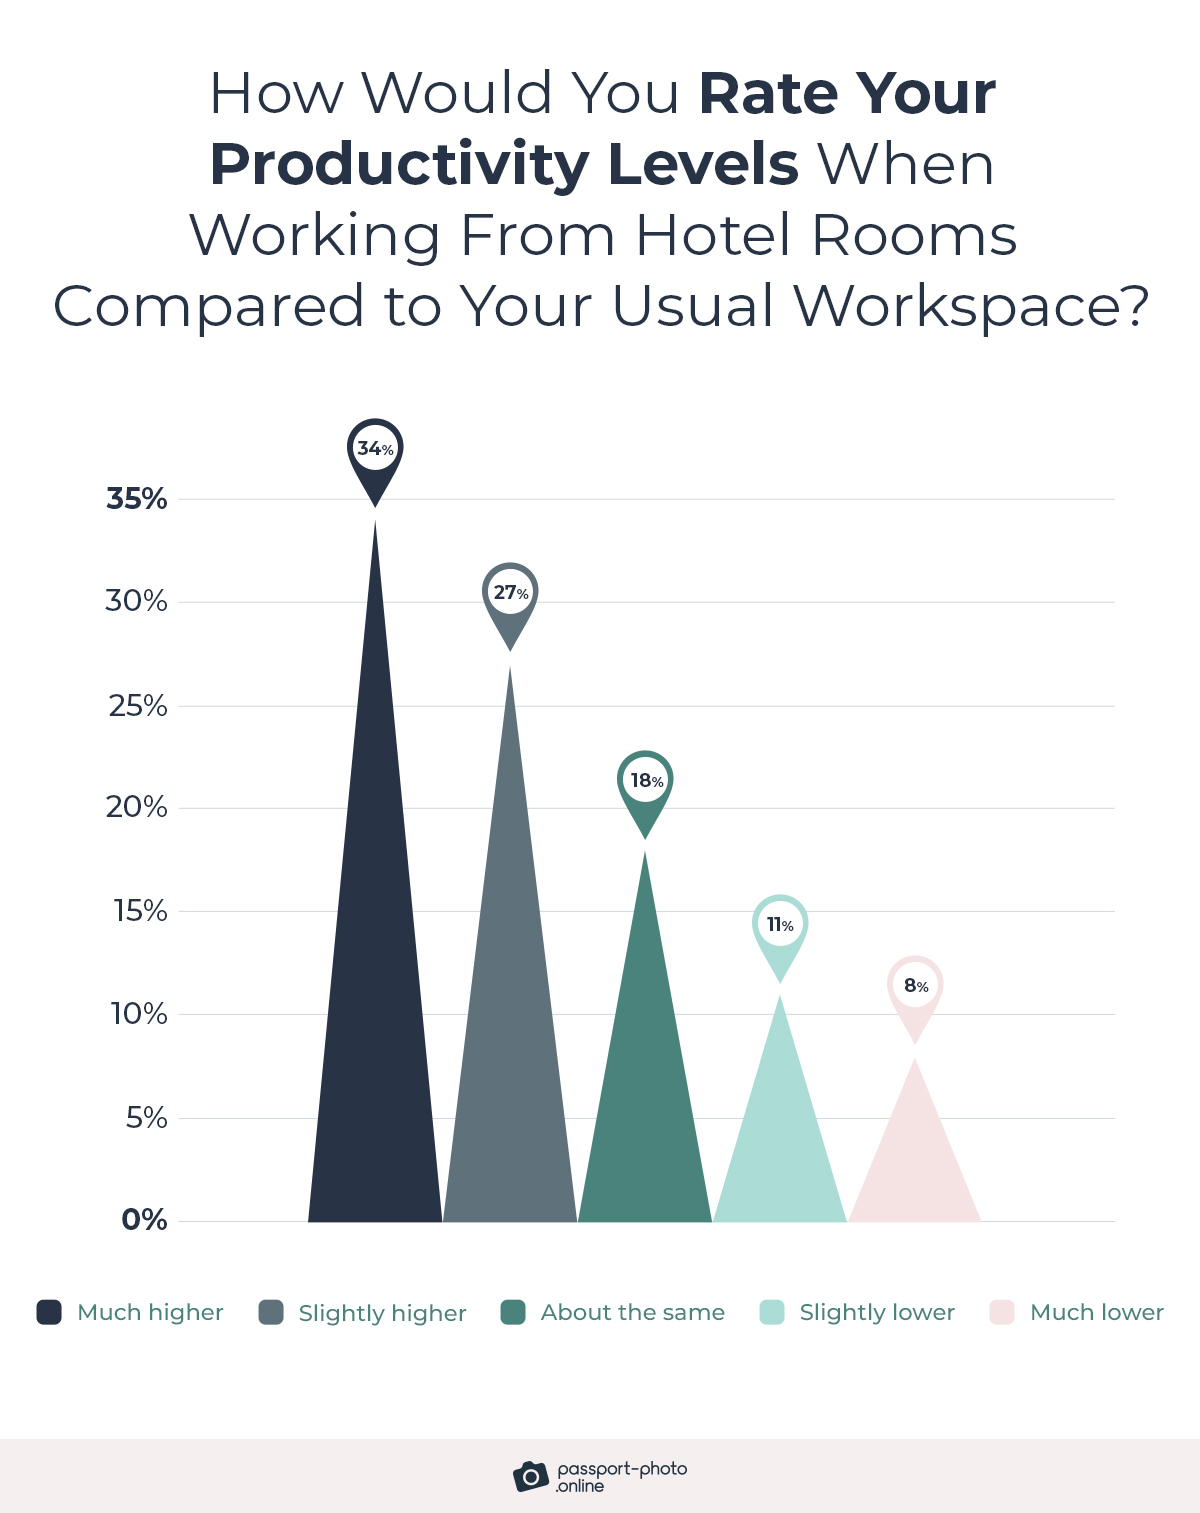 61% of respondents rated their productivity levels as slightly higher or much higher when working from a hotel room